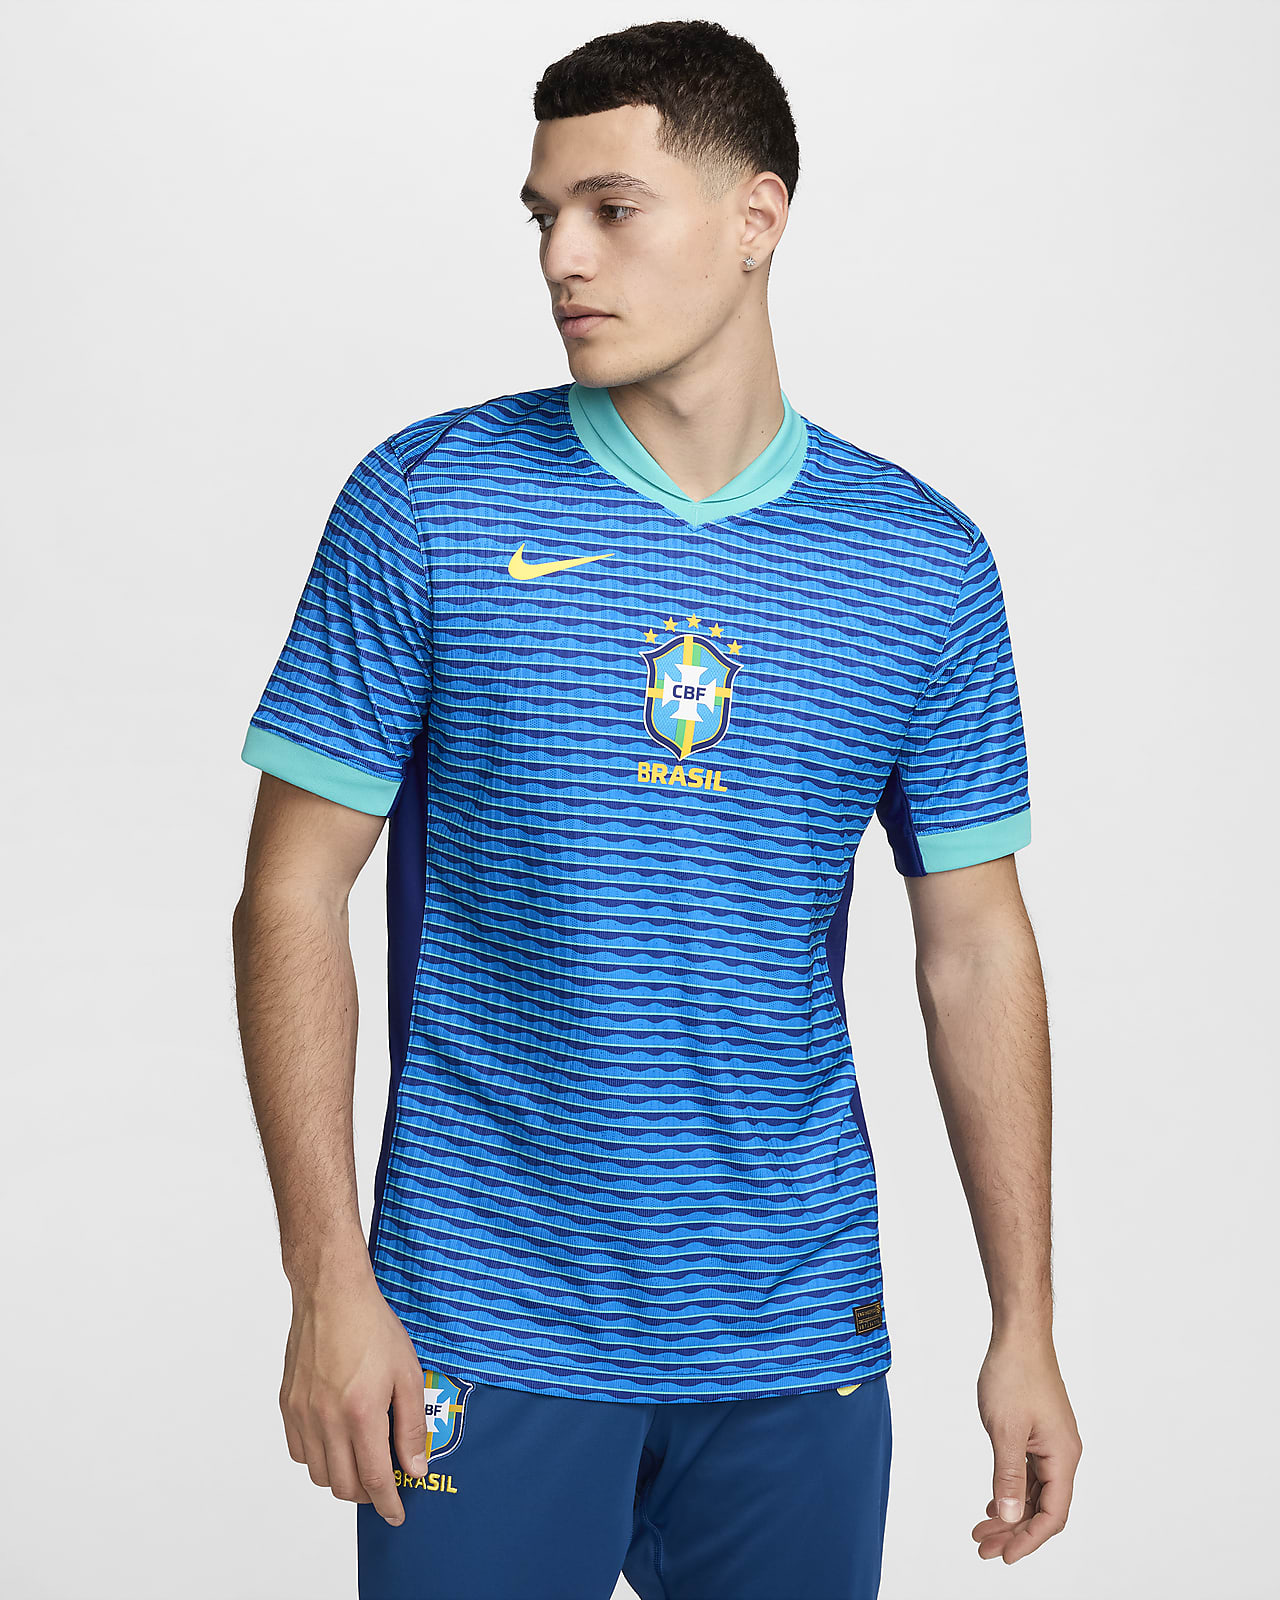 Brazil Personalized Away Soccer Country Jersey